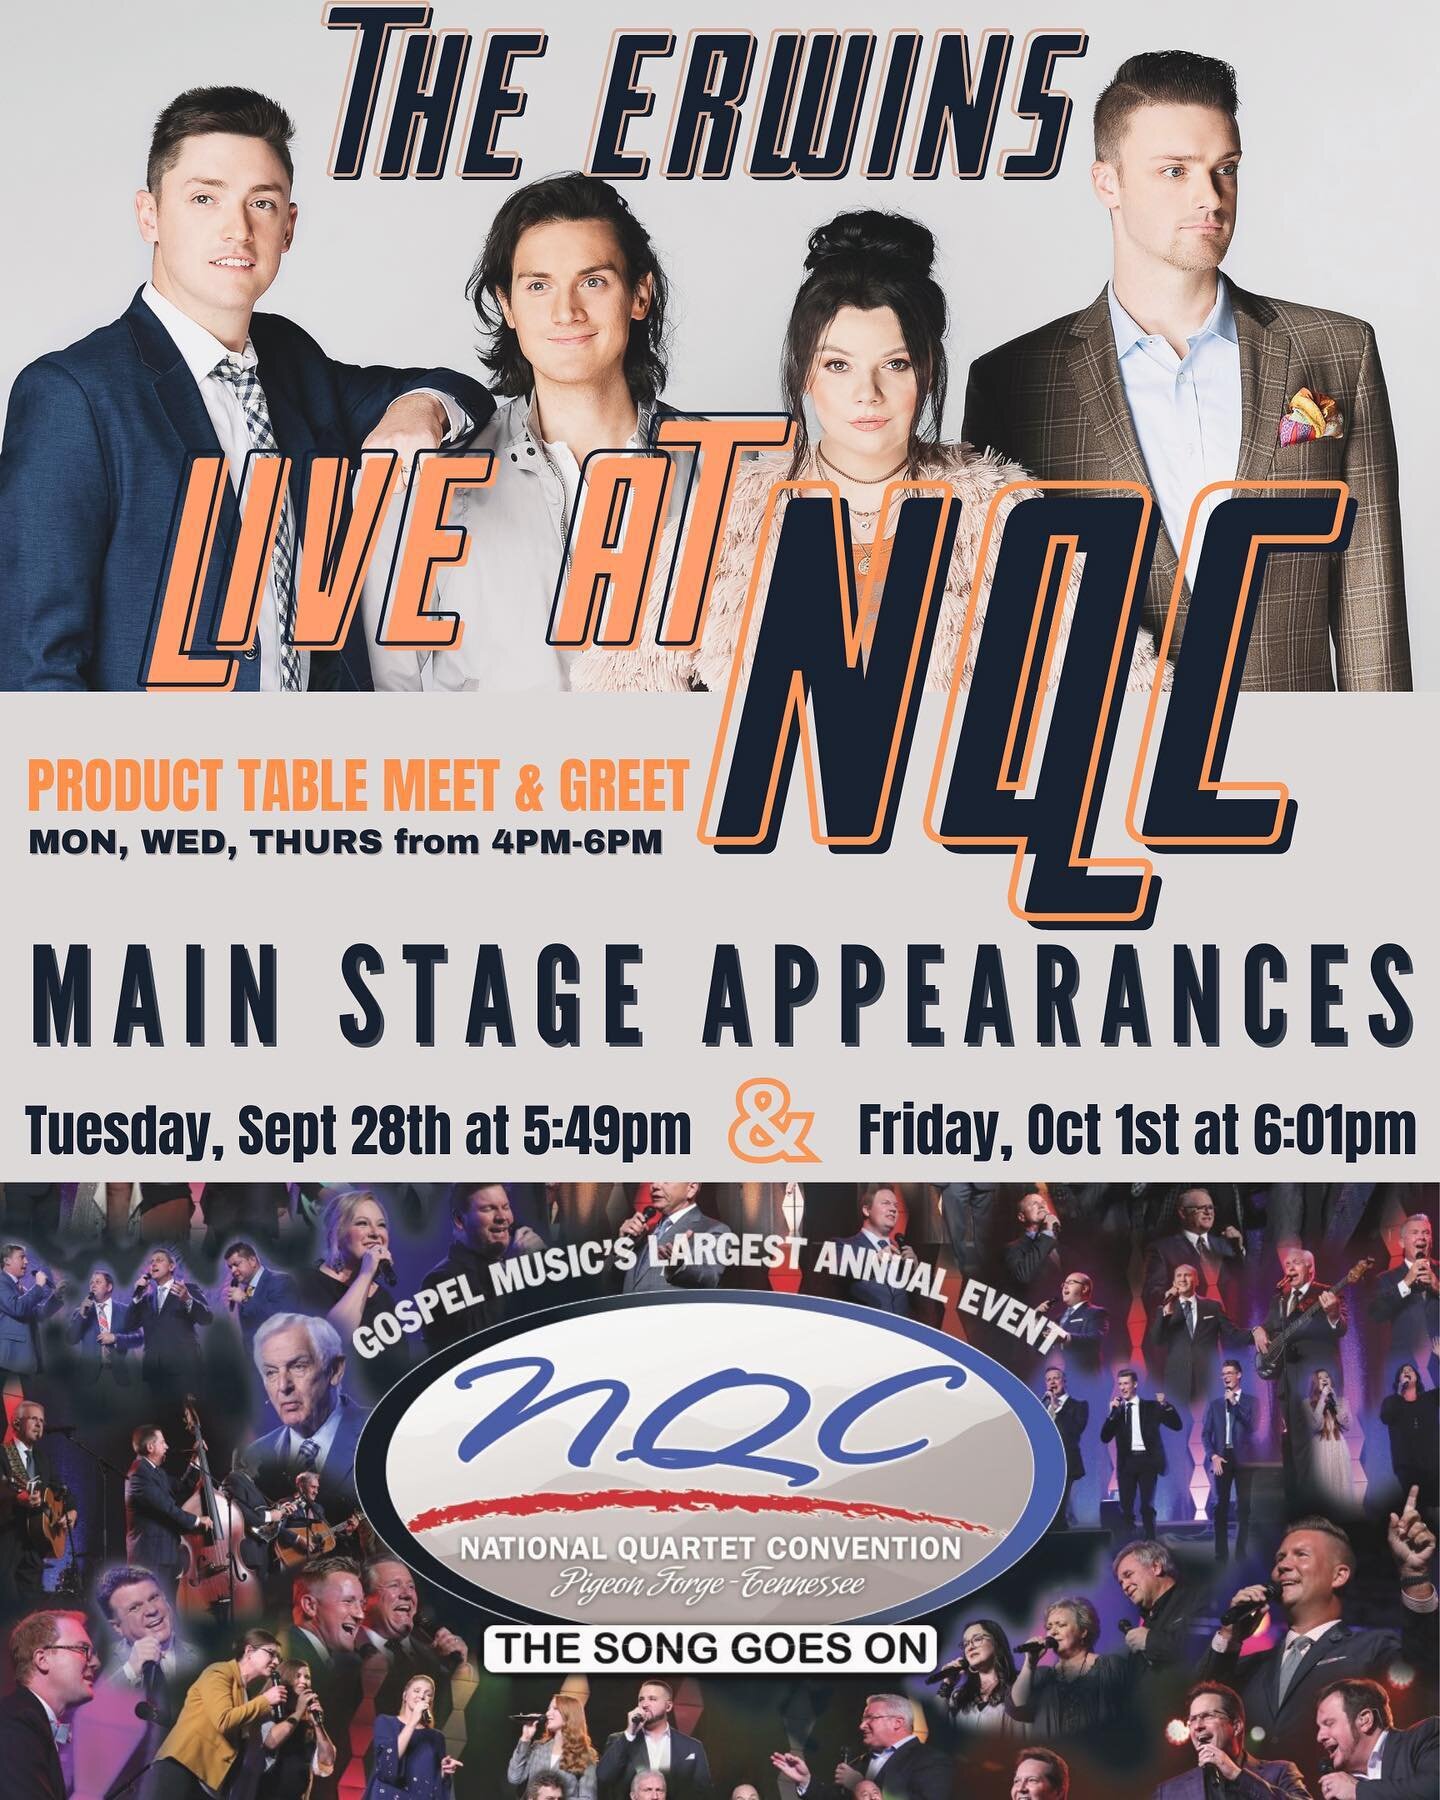 NQC is almost here!!! It&rsquo;s one of our favorite weeks of the year!🥳👏🏼
(that rhymed ... someone write a song! Haha!)
@nqcevent 

Are we gonna see YOU in Pigeon Forge, TN next week? 😊

For tickets and more information visit natqc.com !!! #NQC2